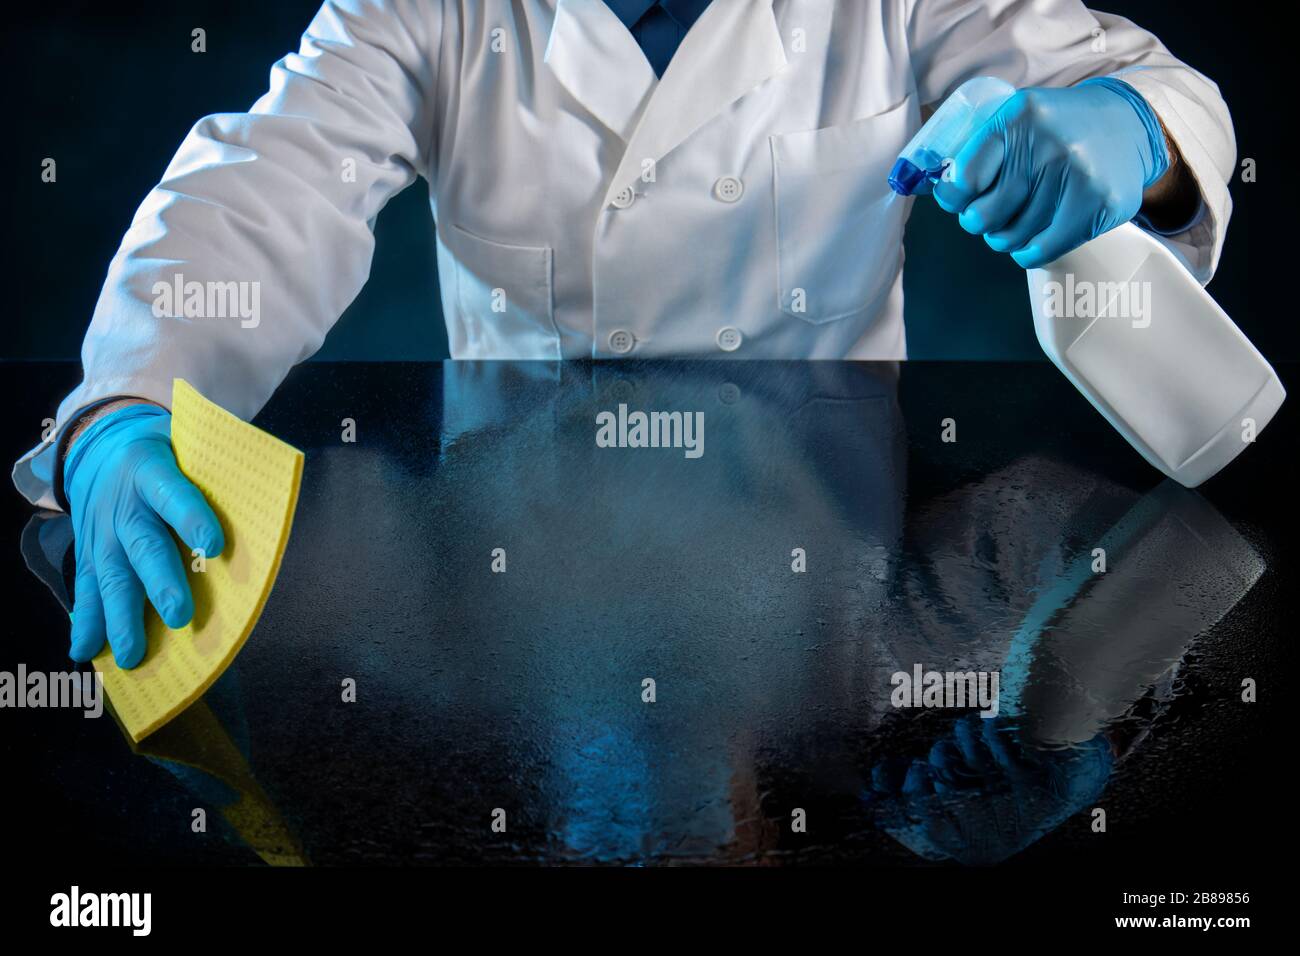 Person dressed in white uniform spraying a table with anti virus solution Stock Photo